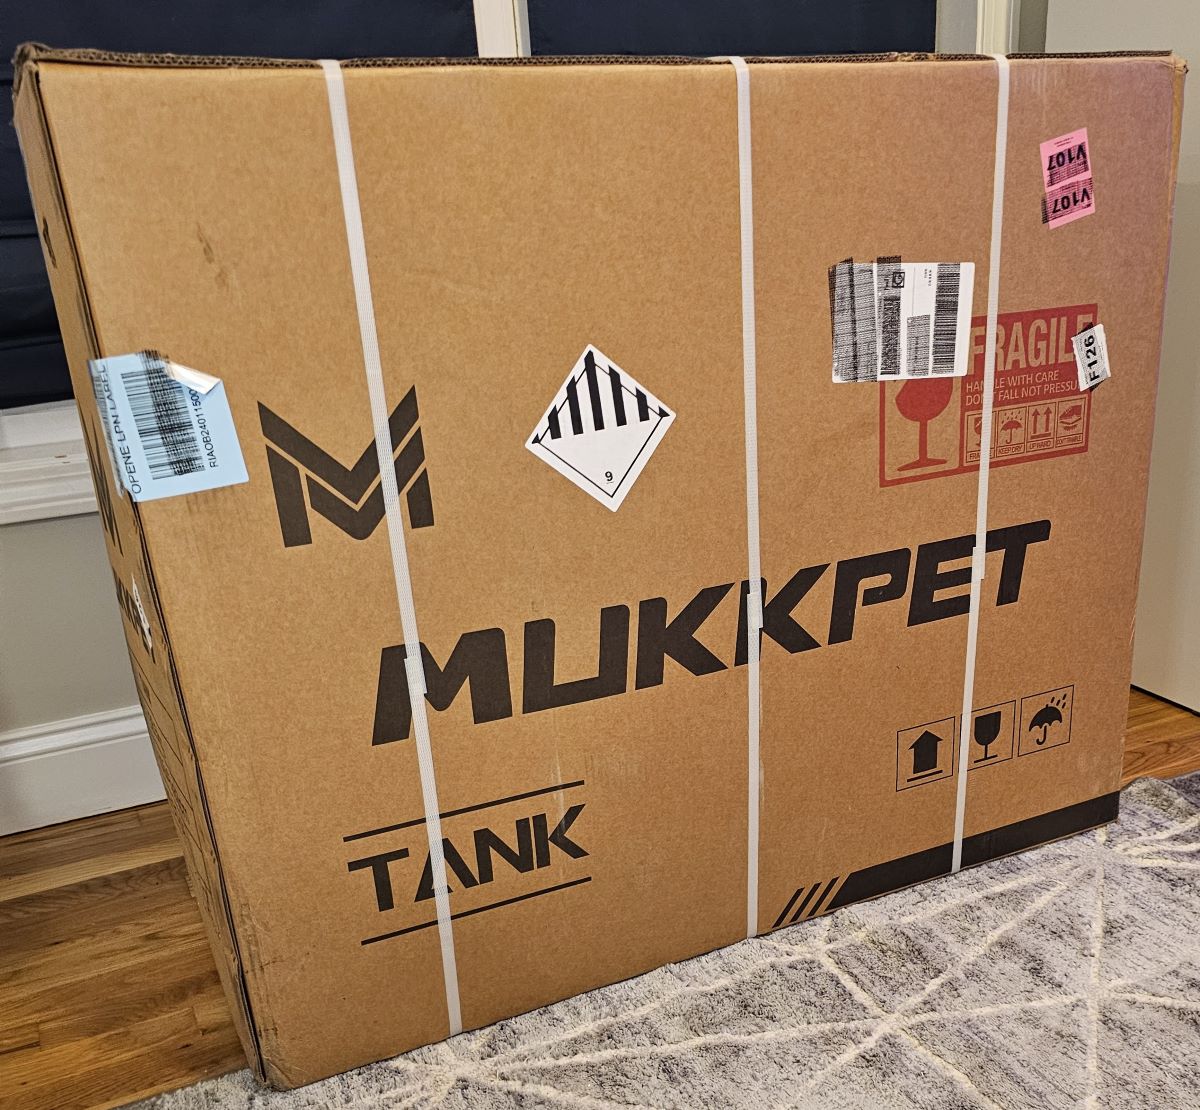 Mukkpet Tank review: Testing out a low-cost full-suspension e-bike